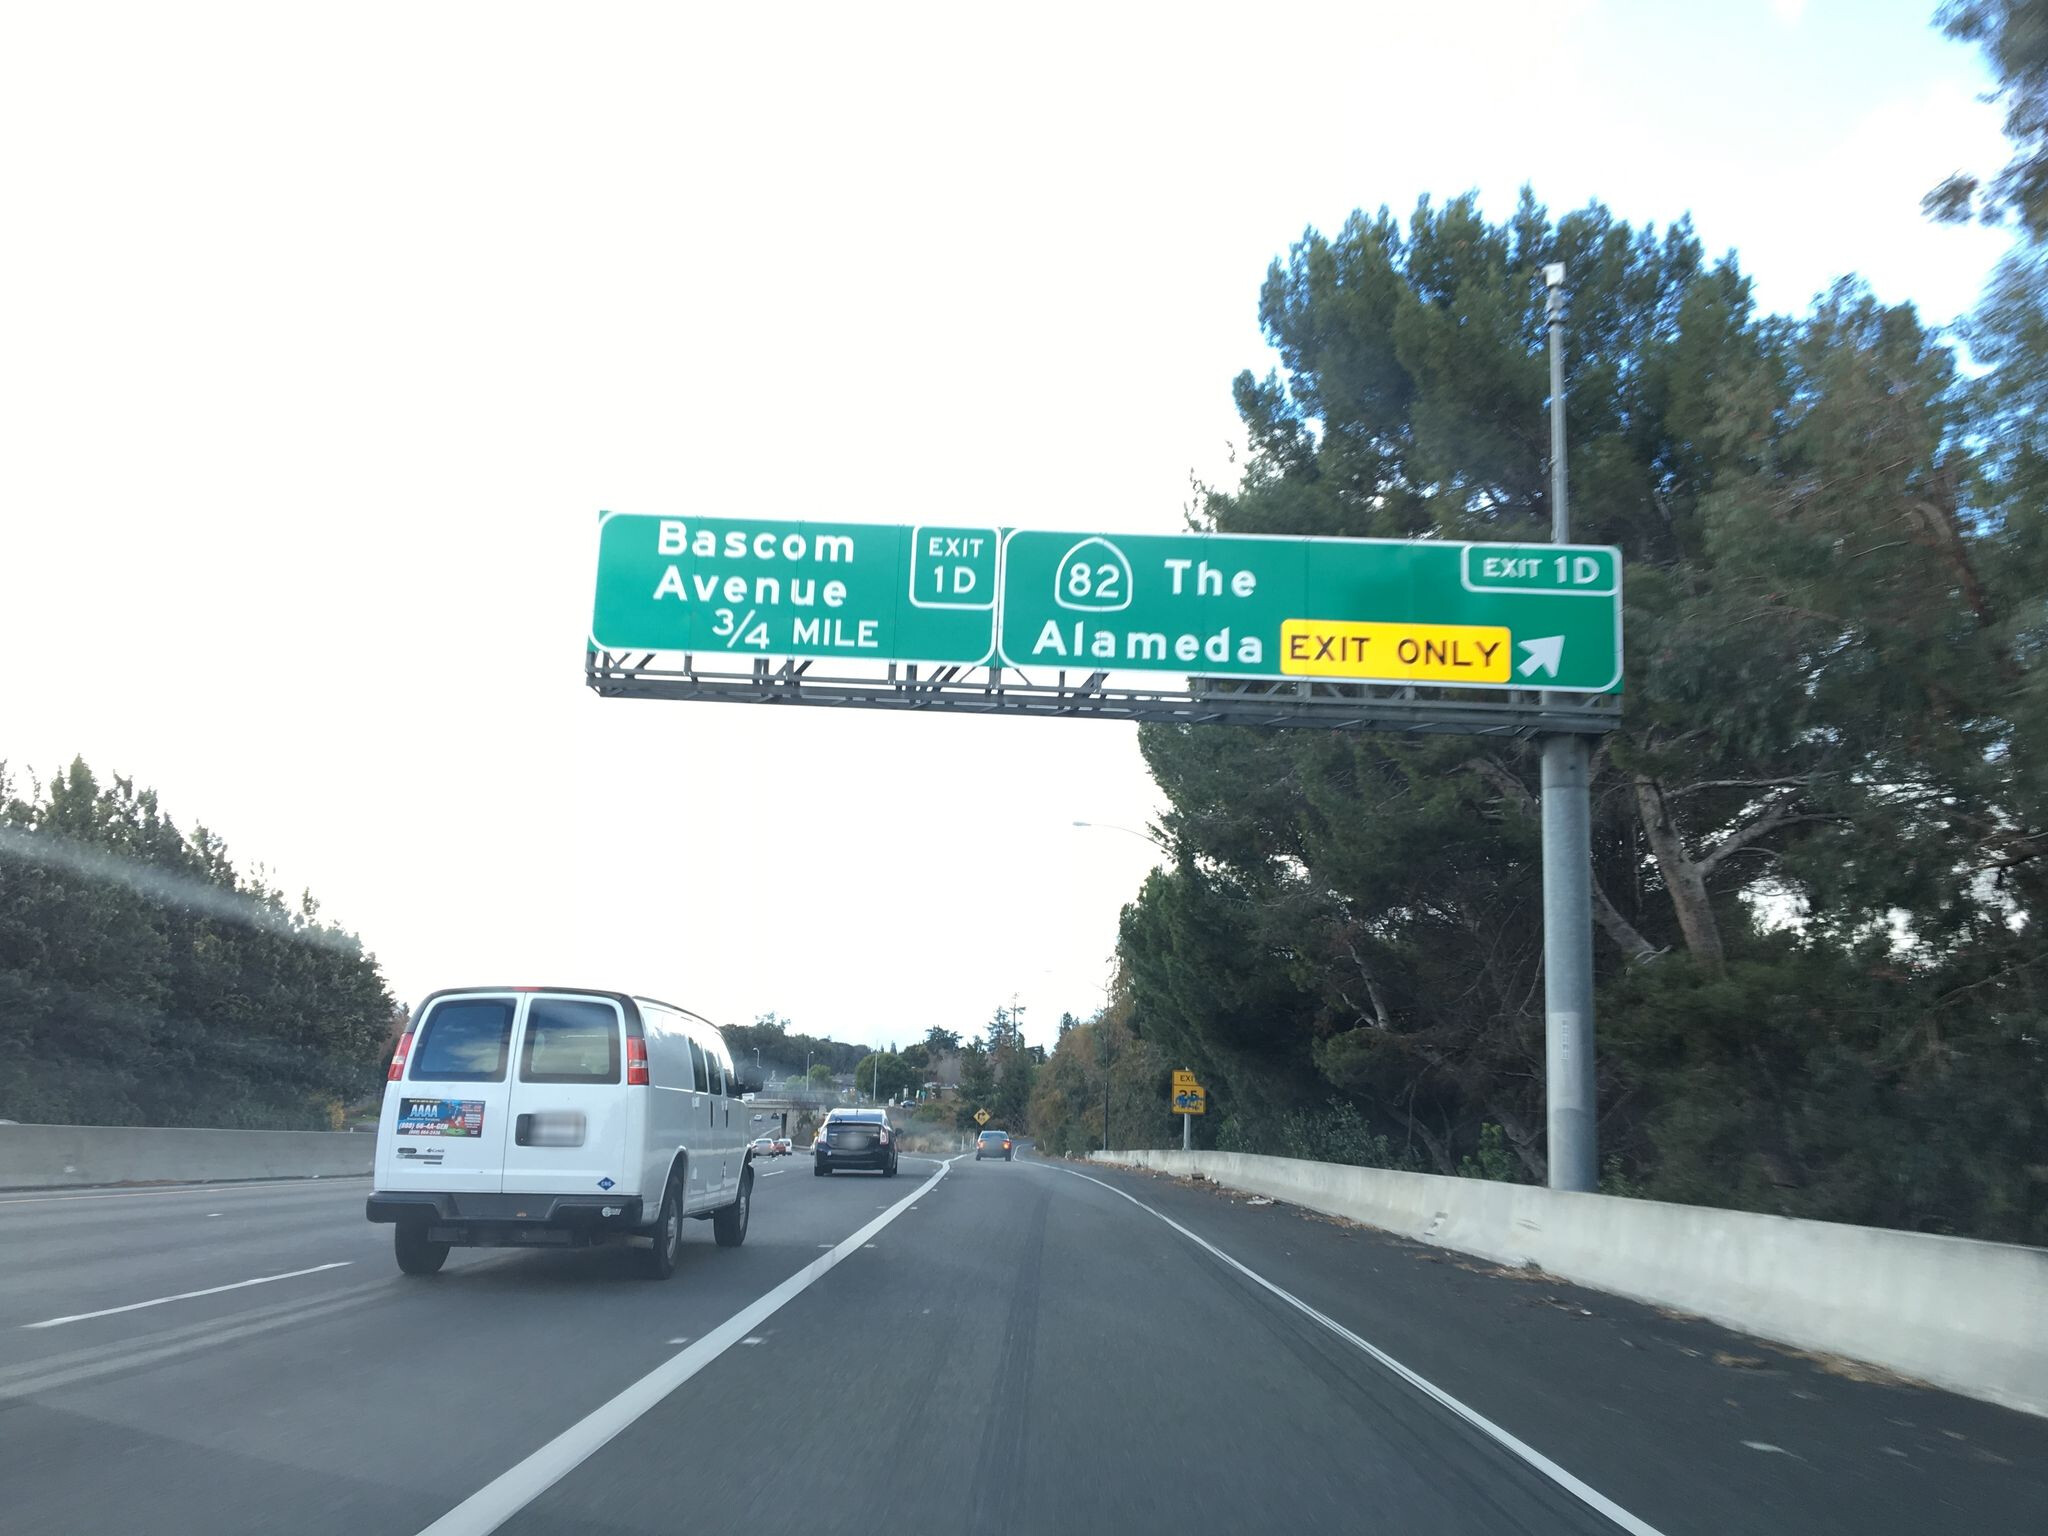 Exit 1D: State Route 82 / The Alameda, Exit Only (© 2018 Nikki Diaz, CC BY-SA 4.0)